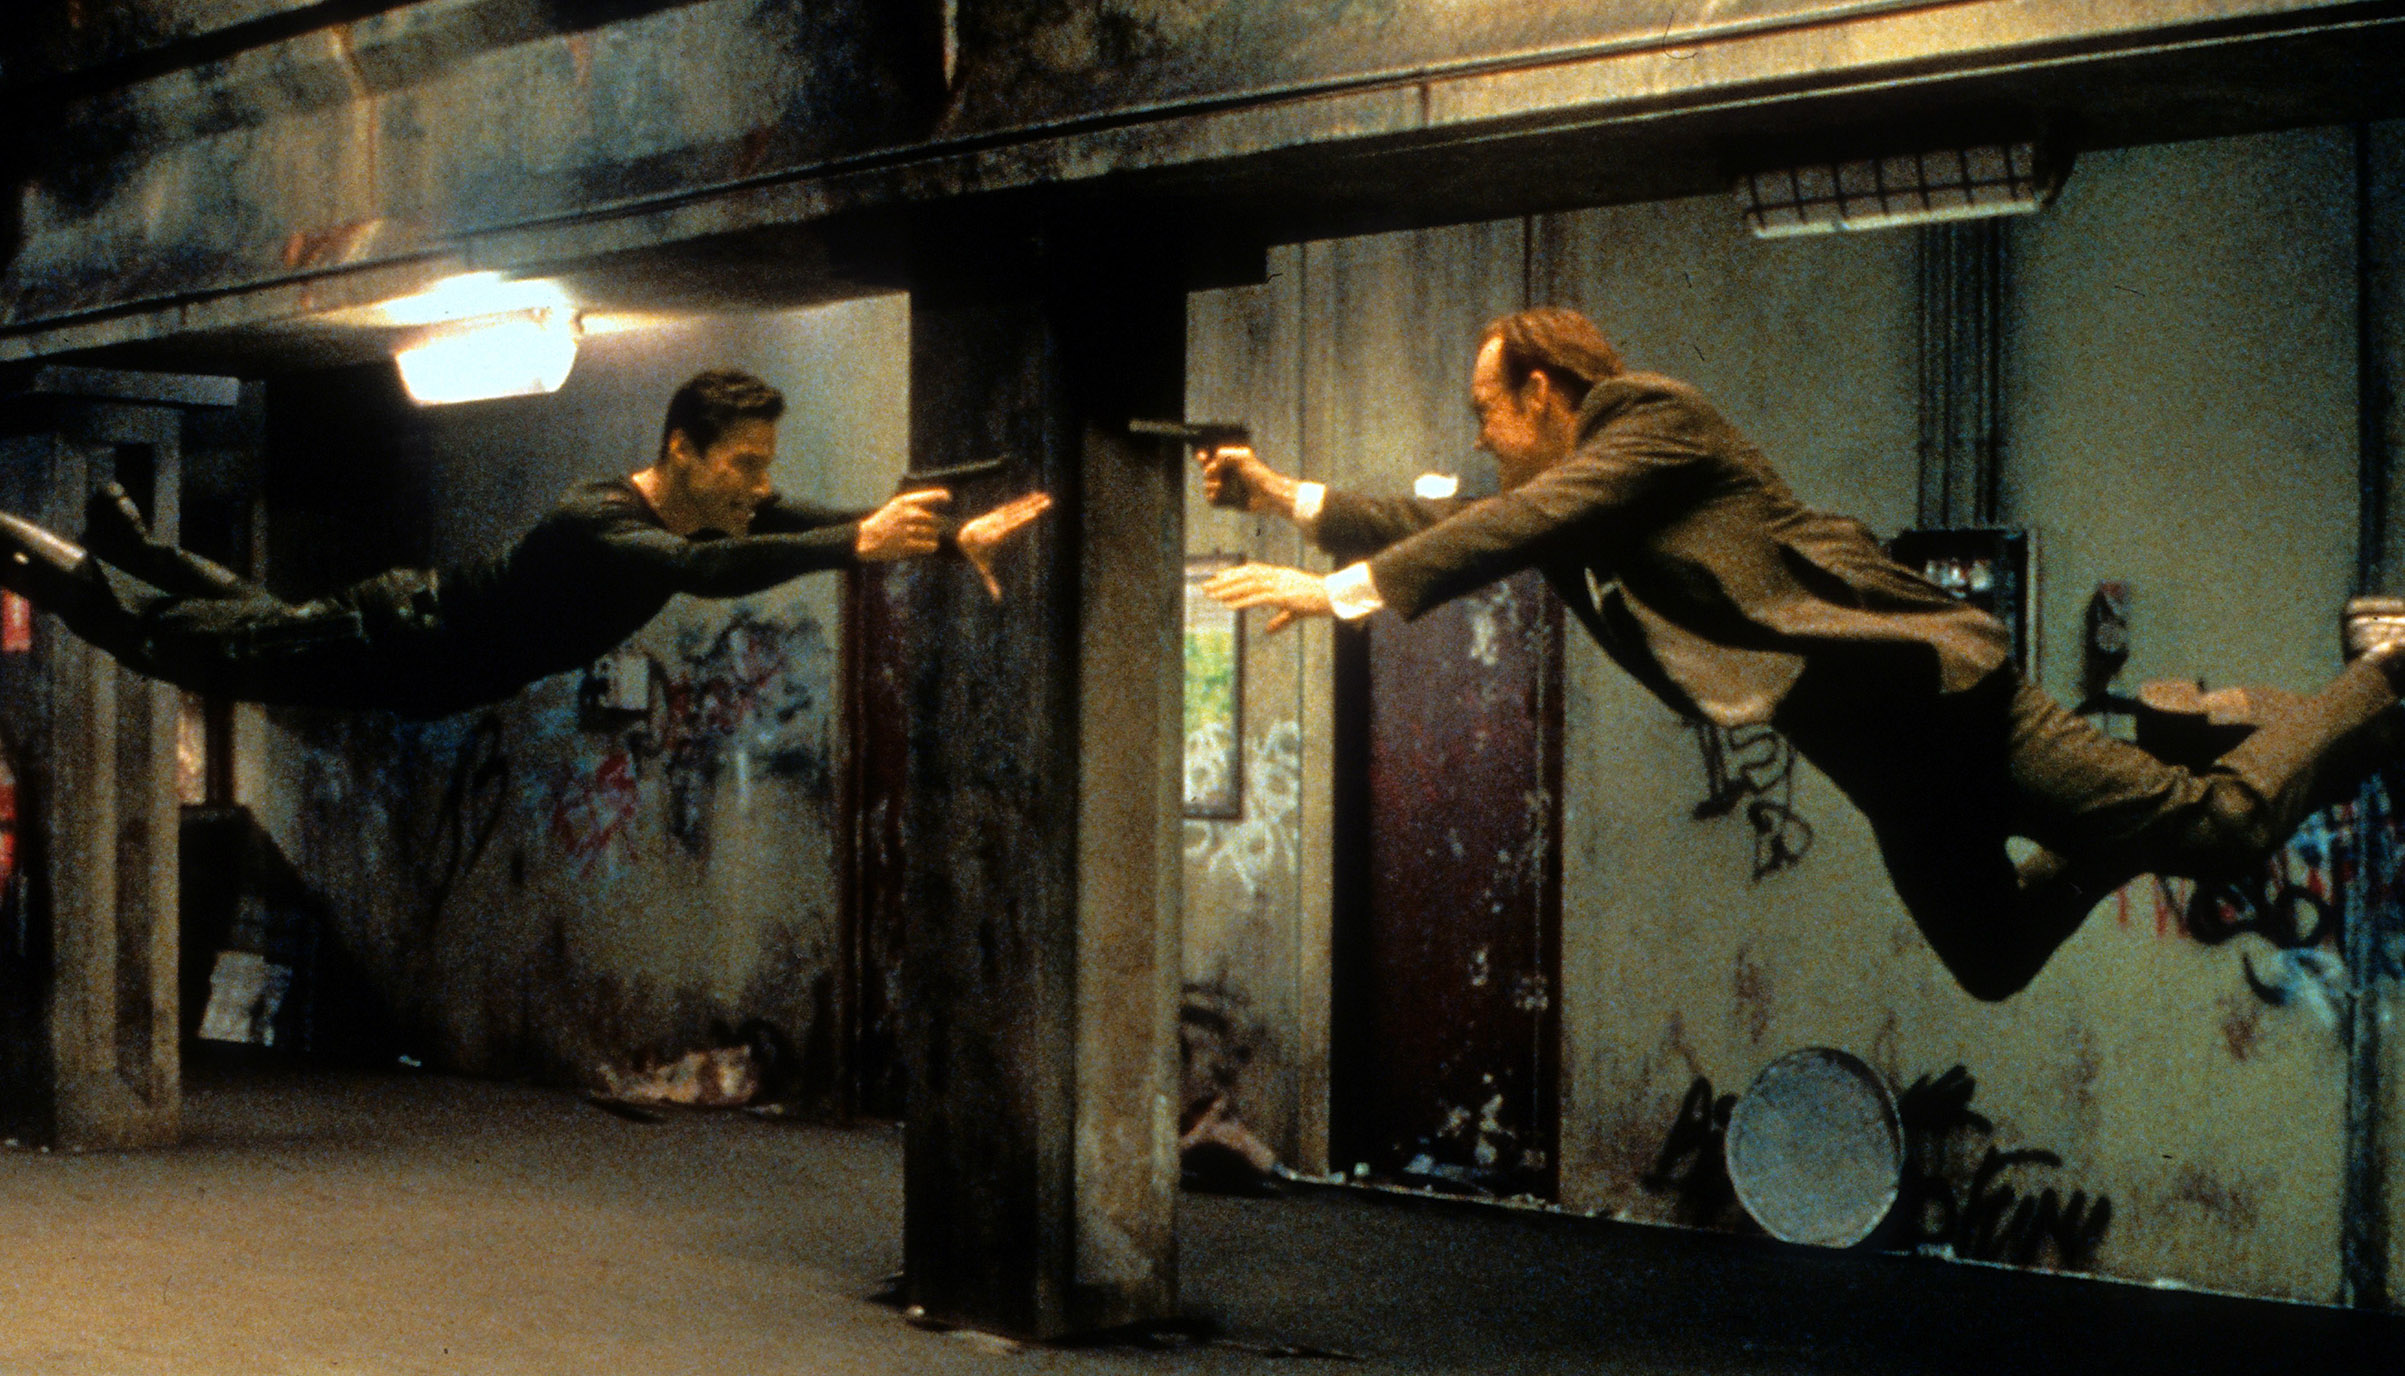 Keanu Reeves and Hugo Weaving pointing guns at each other in a scene from the film 'The Matrix', 1999. (Warner Brothers/Getty Images)